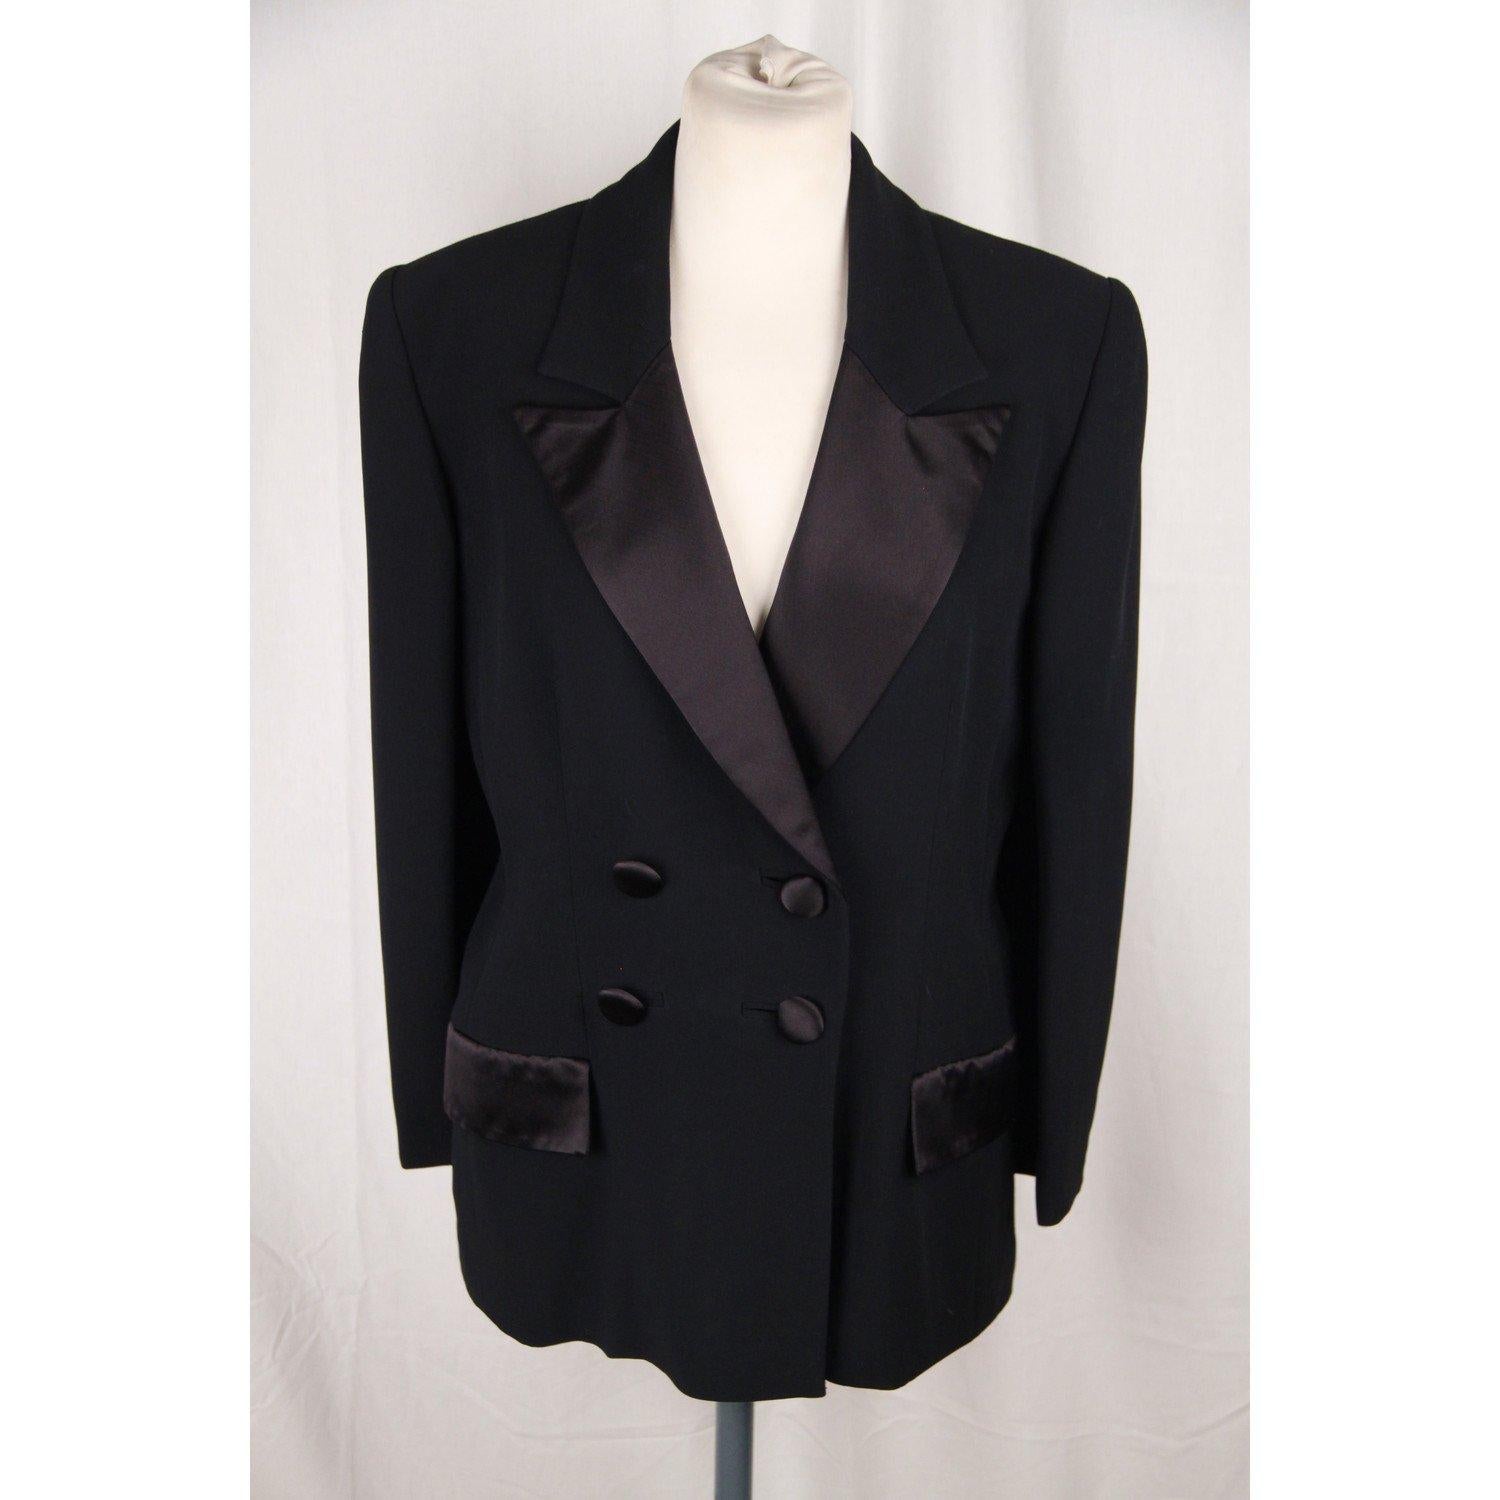 MATERIAL: Light Weight Fabric COLOR: Black MODEL: Double-breasted Blazer GENDER: Women SIZE: Medium Condition A :EXCELLENT CONDITION - Used once or twice. Looks mint. Imperceptible signs of wear Measurements SHOULDER TO SHOULDER: 17.5 inches - 44,5